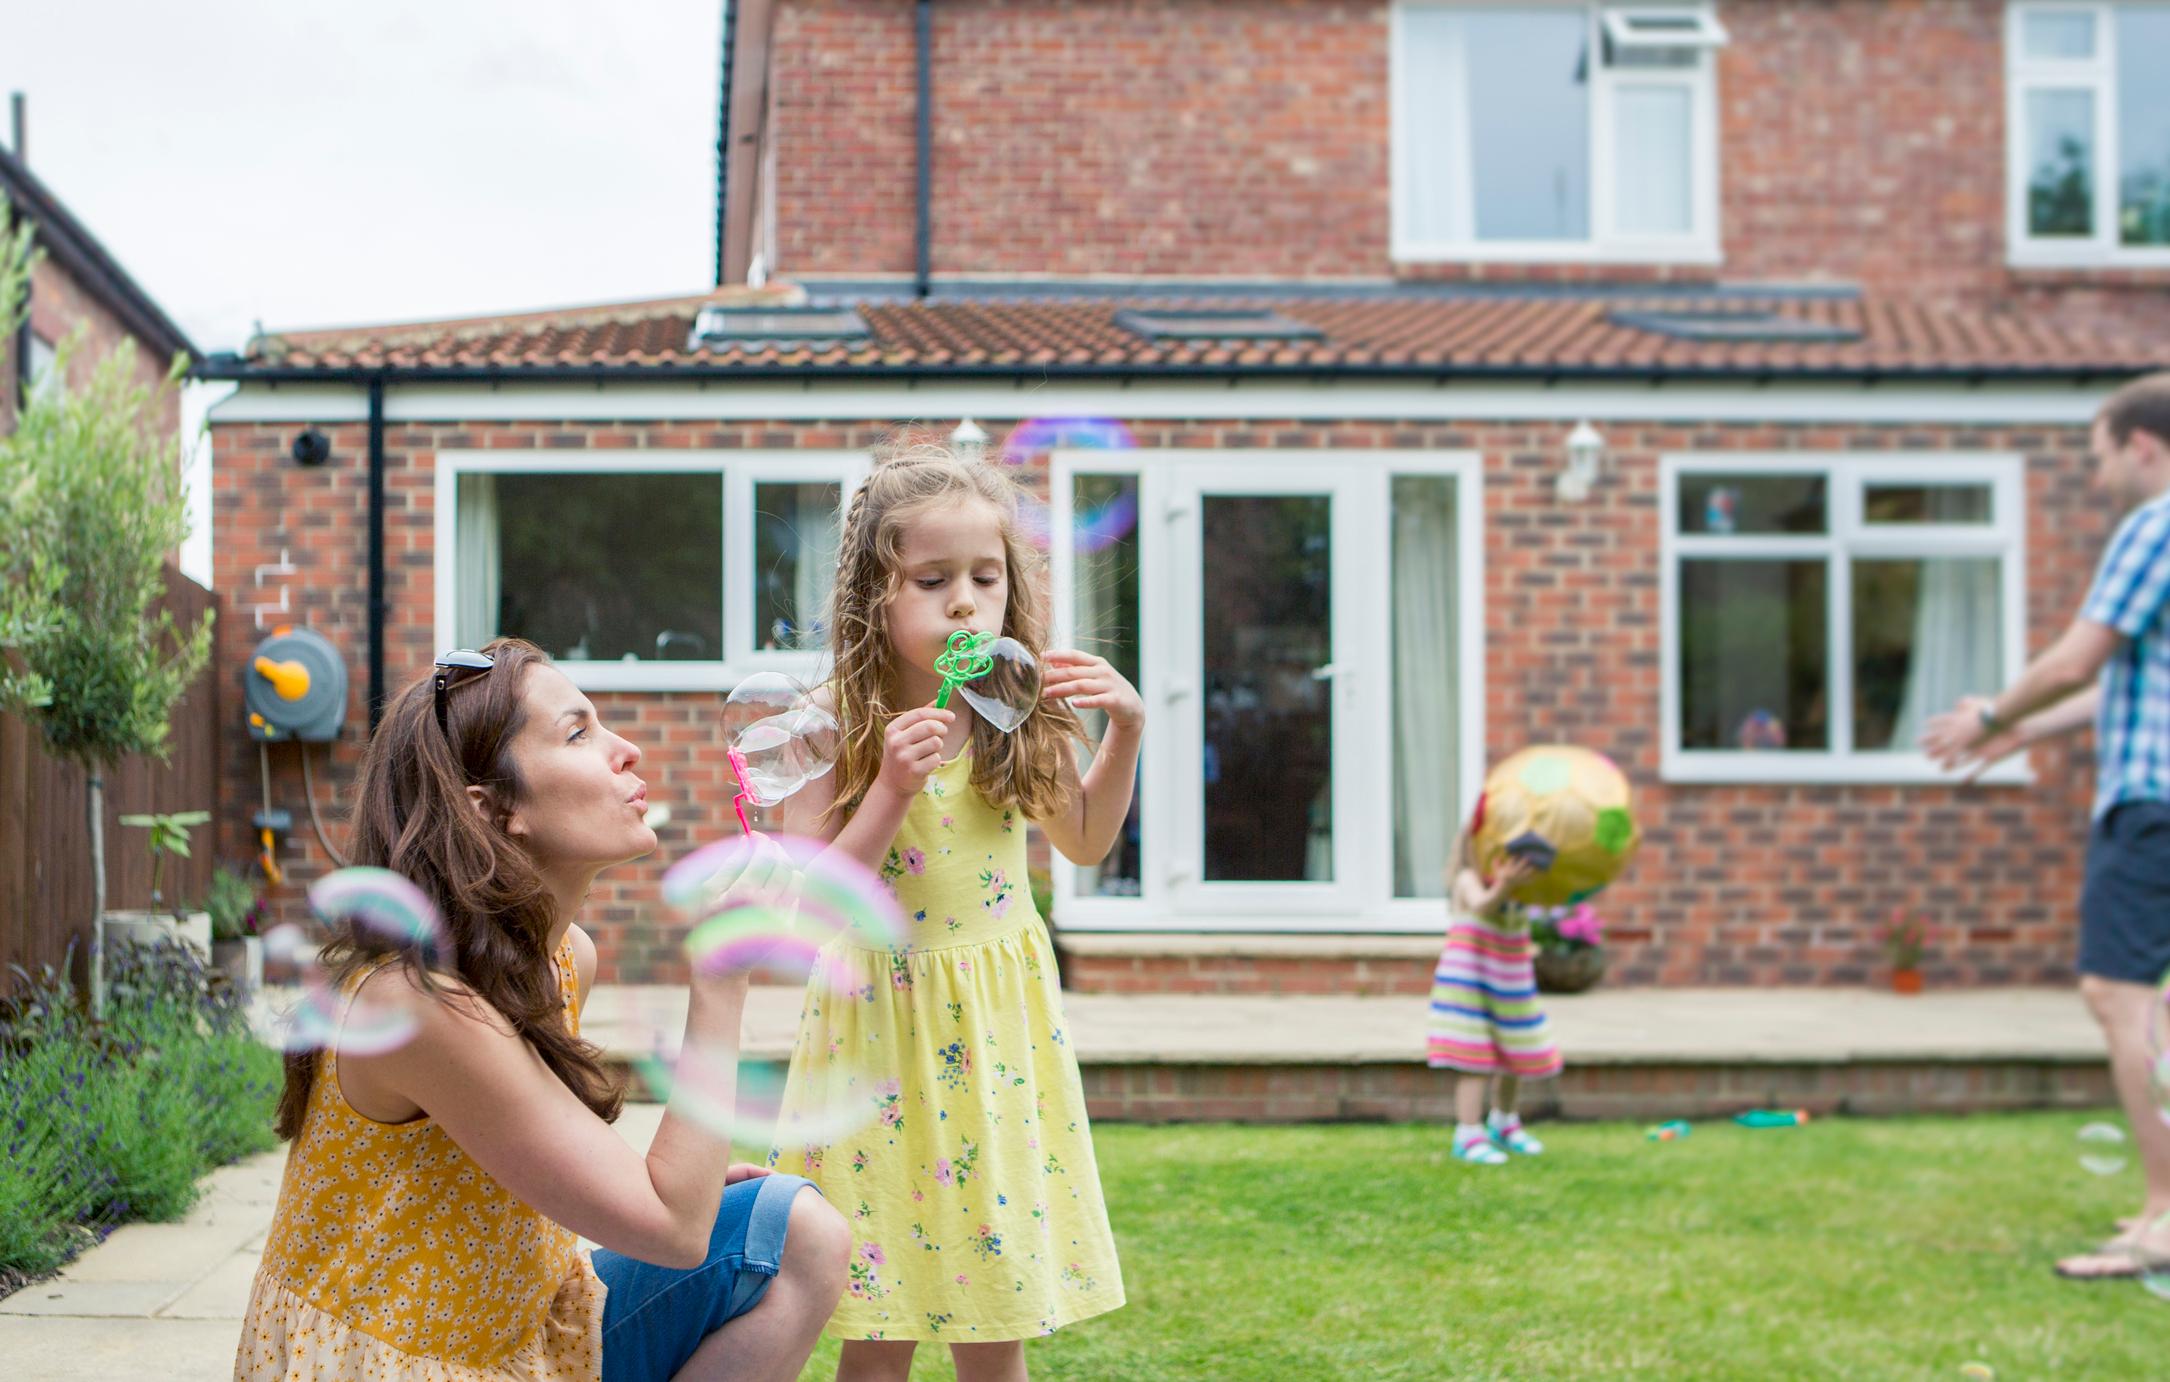 Mother and daughter playing together in the garden blowing bubbles.